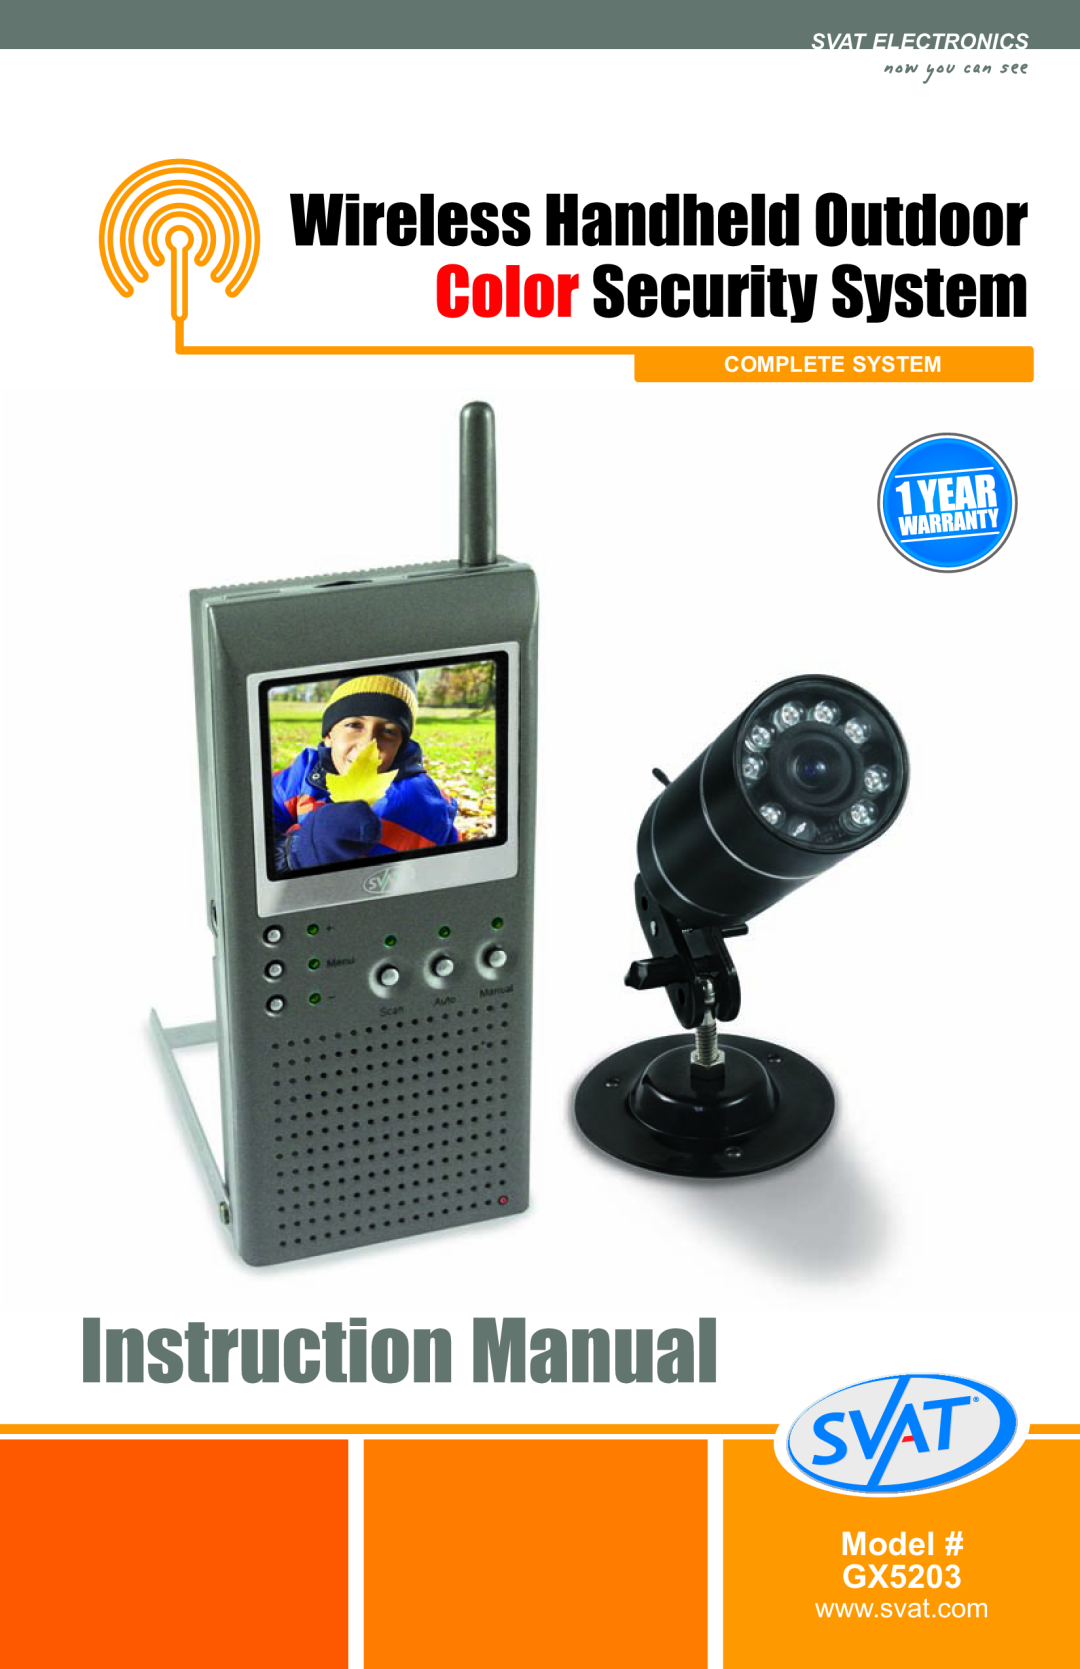 SVAT Electronics instruction manual now you can see, Model # GX5203, Wireless Handheld Outdoor Color Security System 